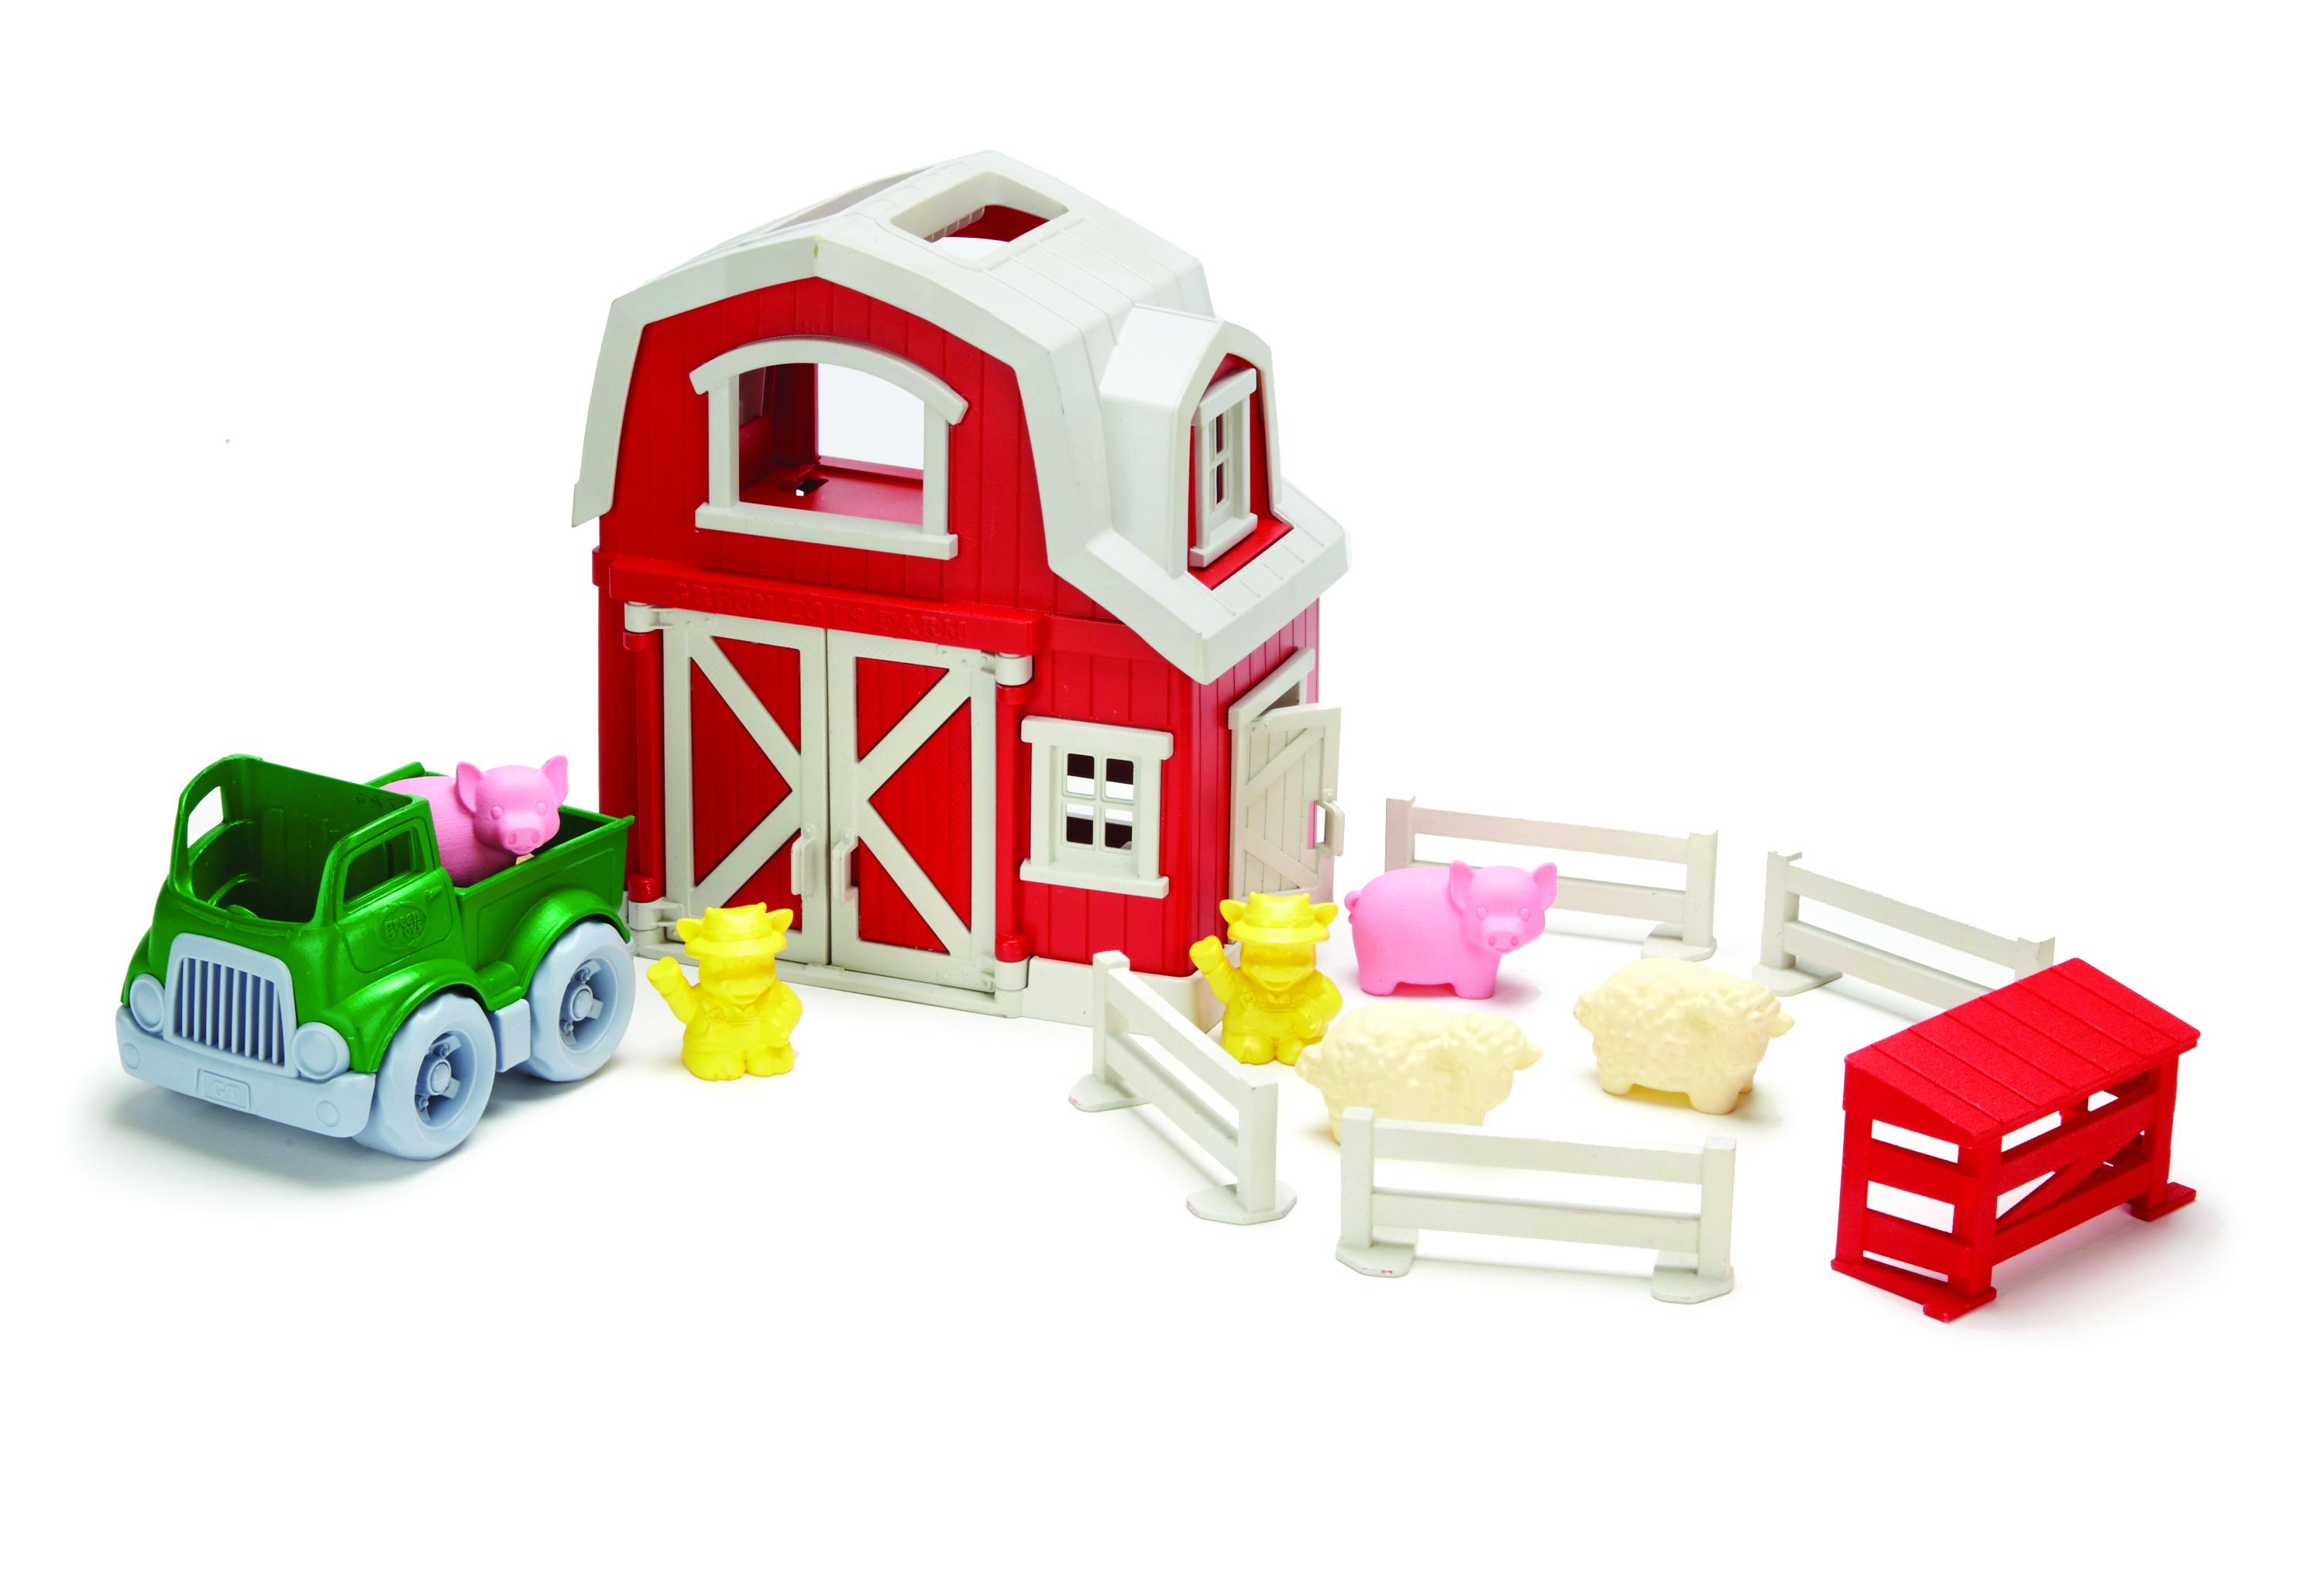 Green Toys Eco Friendly Farm made from recycled plastic